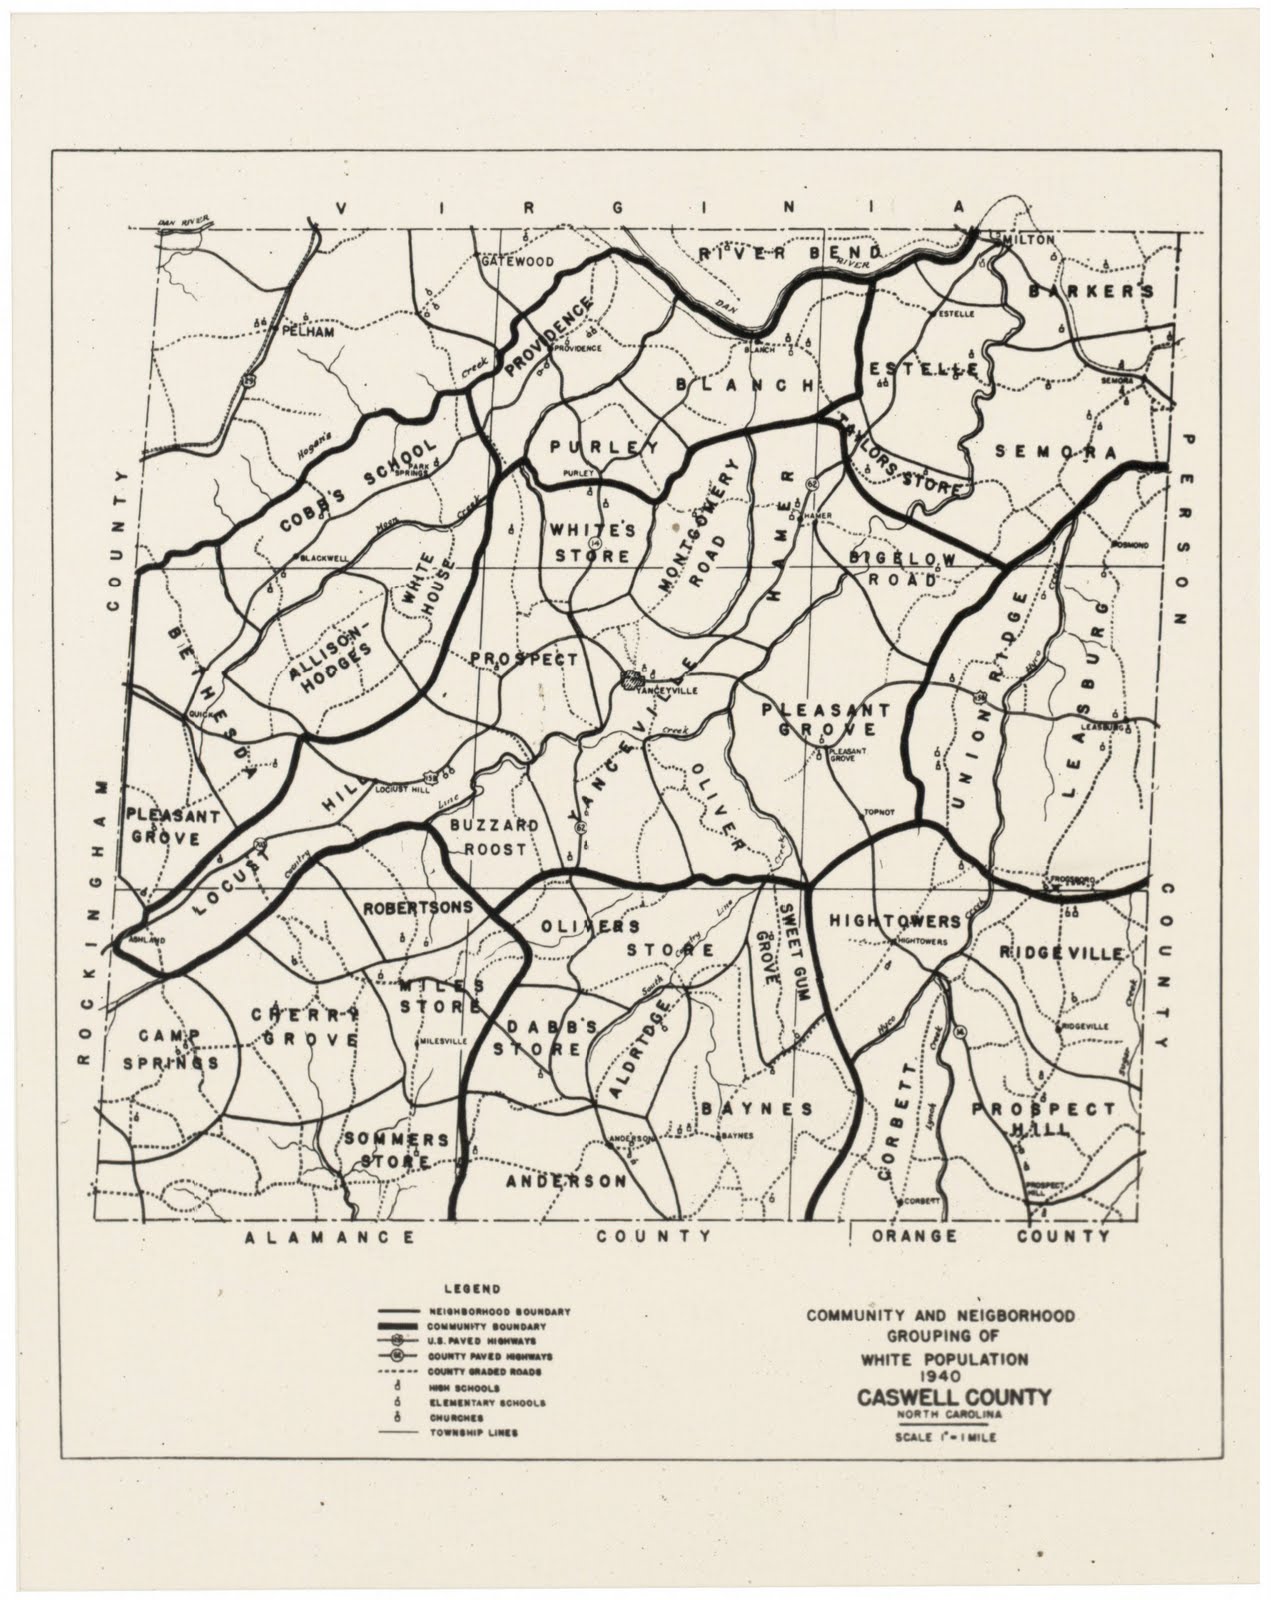 Caswell County North Carolina: Caswell County 1940: Community and  Neighborhood Grouping of White Population